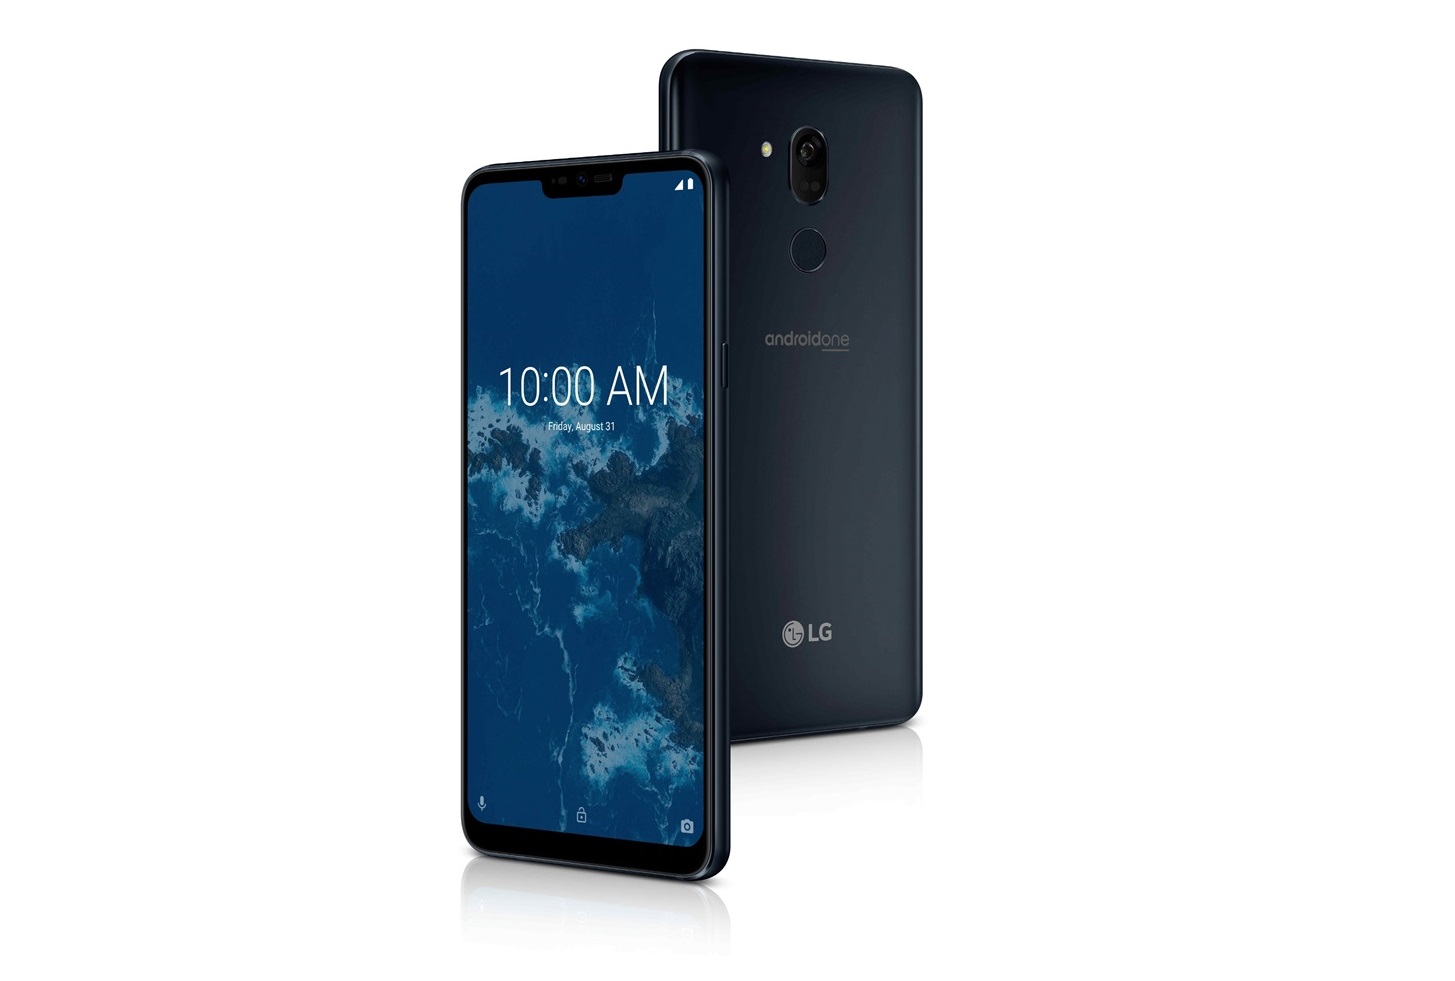 LG G7 One launched: Say hello to LG's first Android One phone
